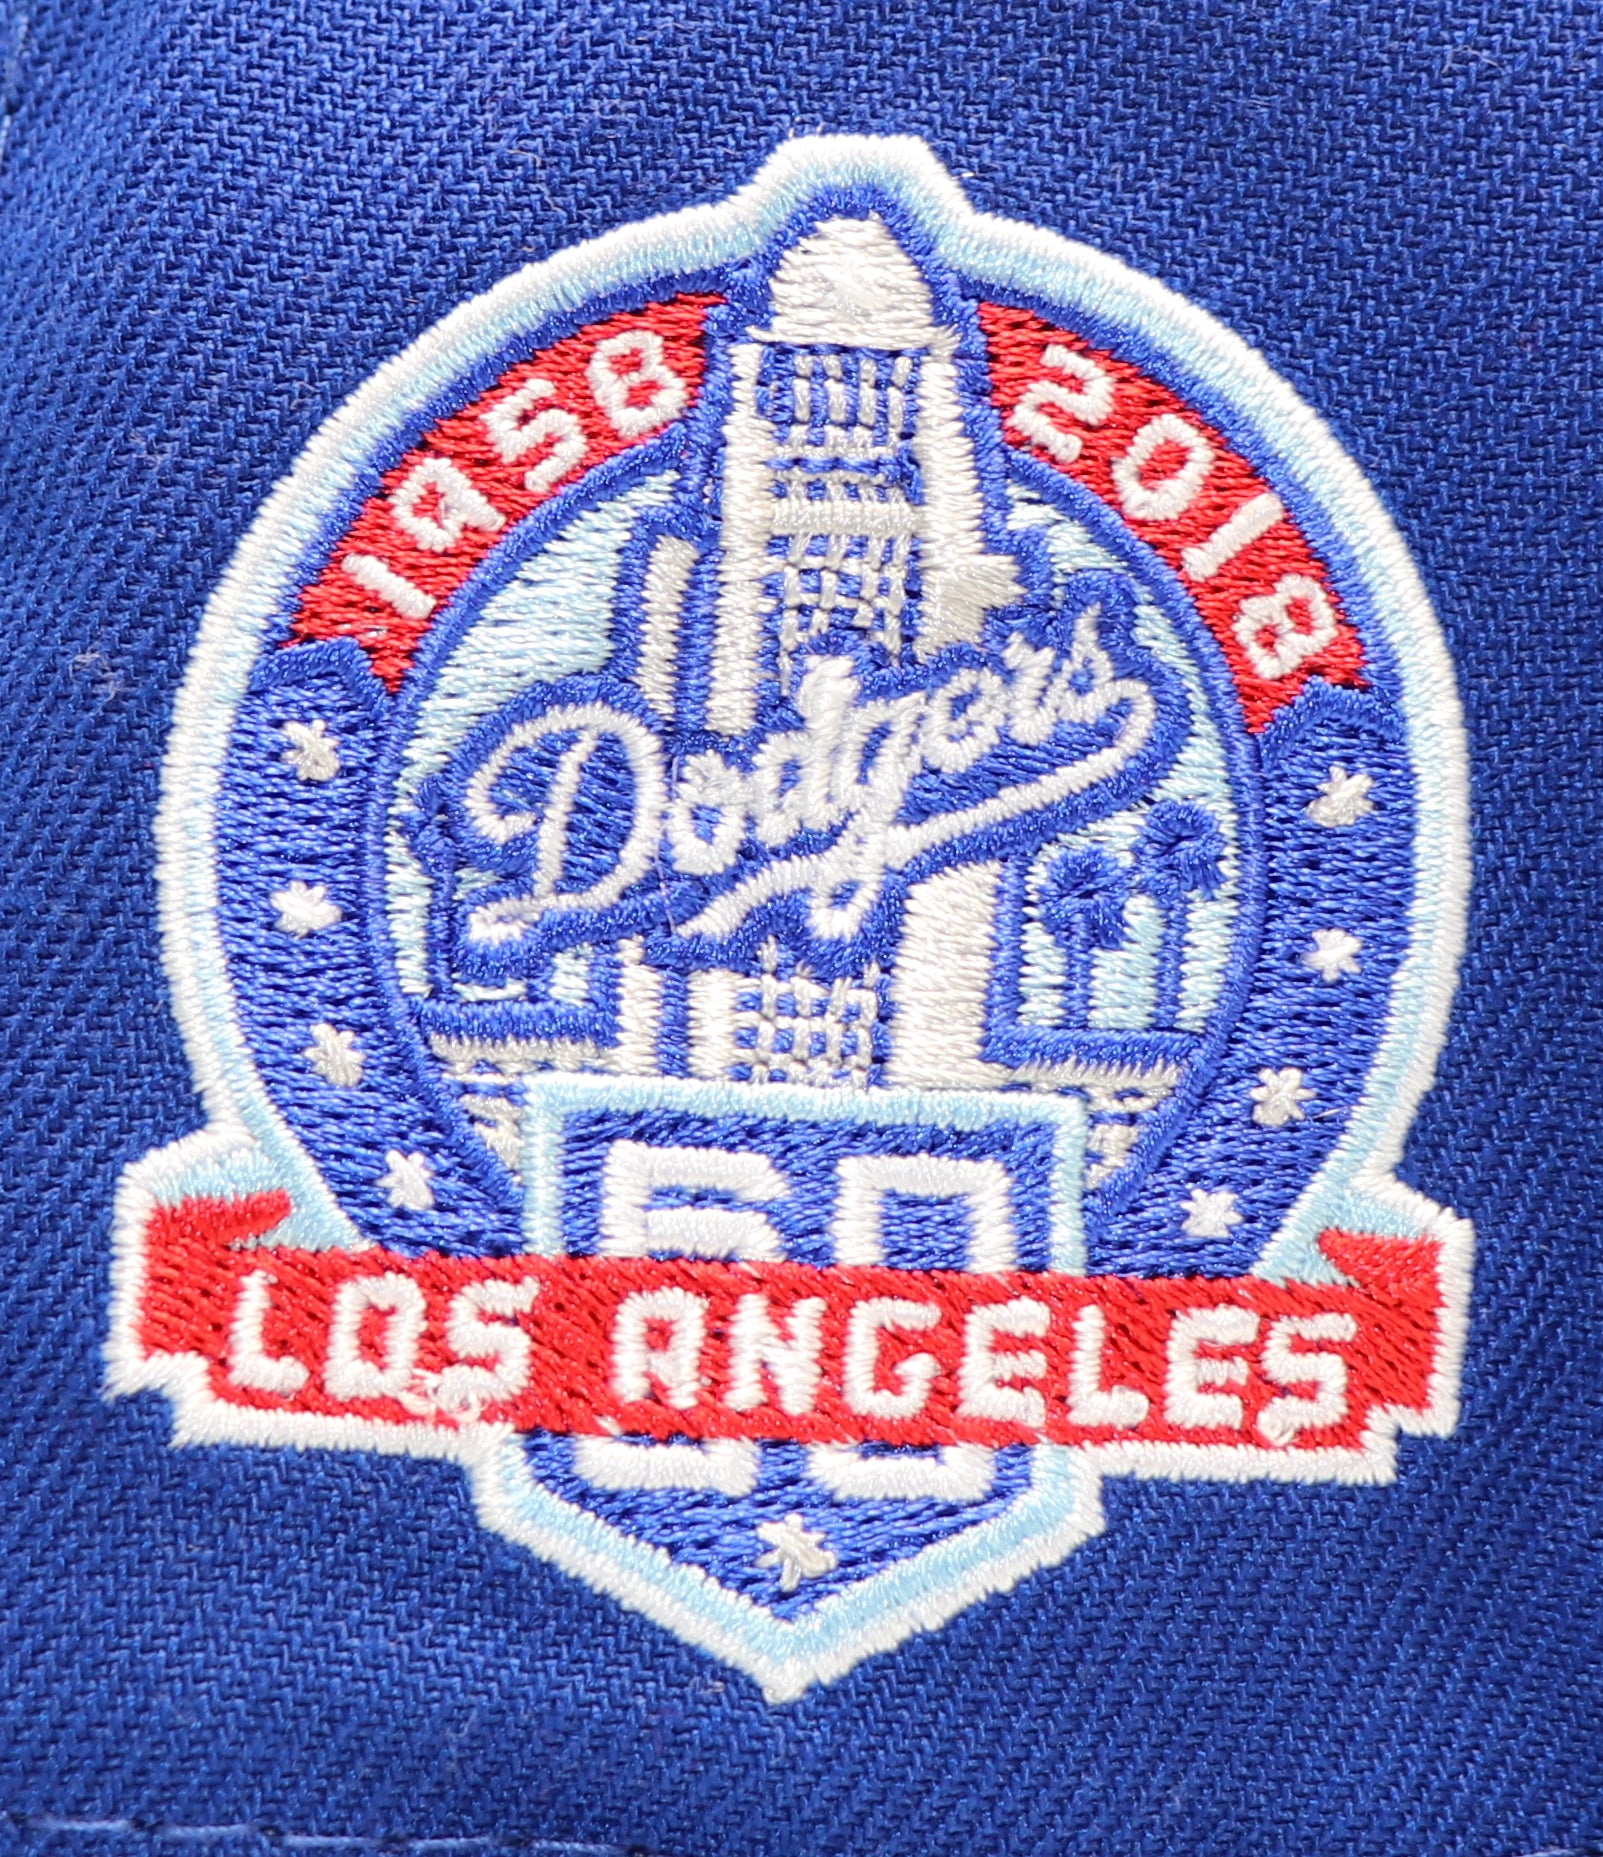 LOS ANGELES DODGERS (60TH ANNIVERSARY) NEW ERA 59FIFTY FITTED (RED UNDER VISOR)